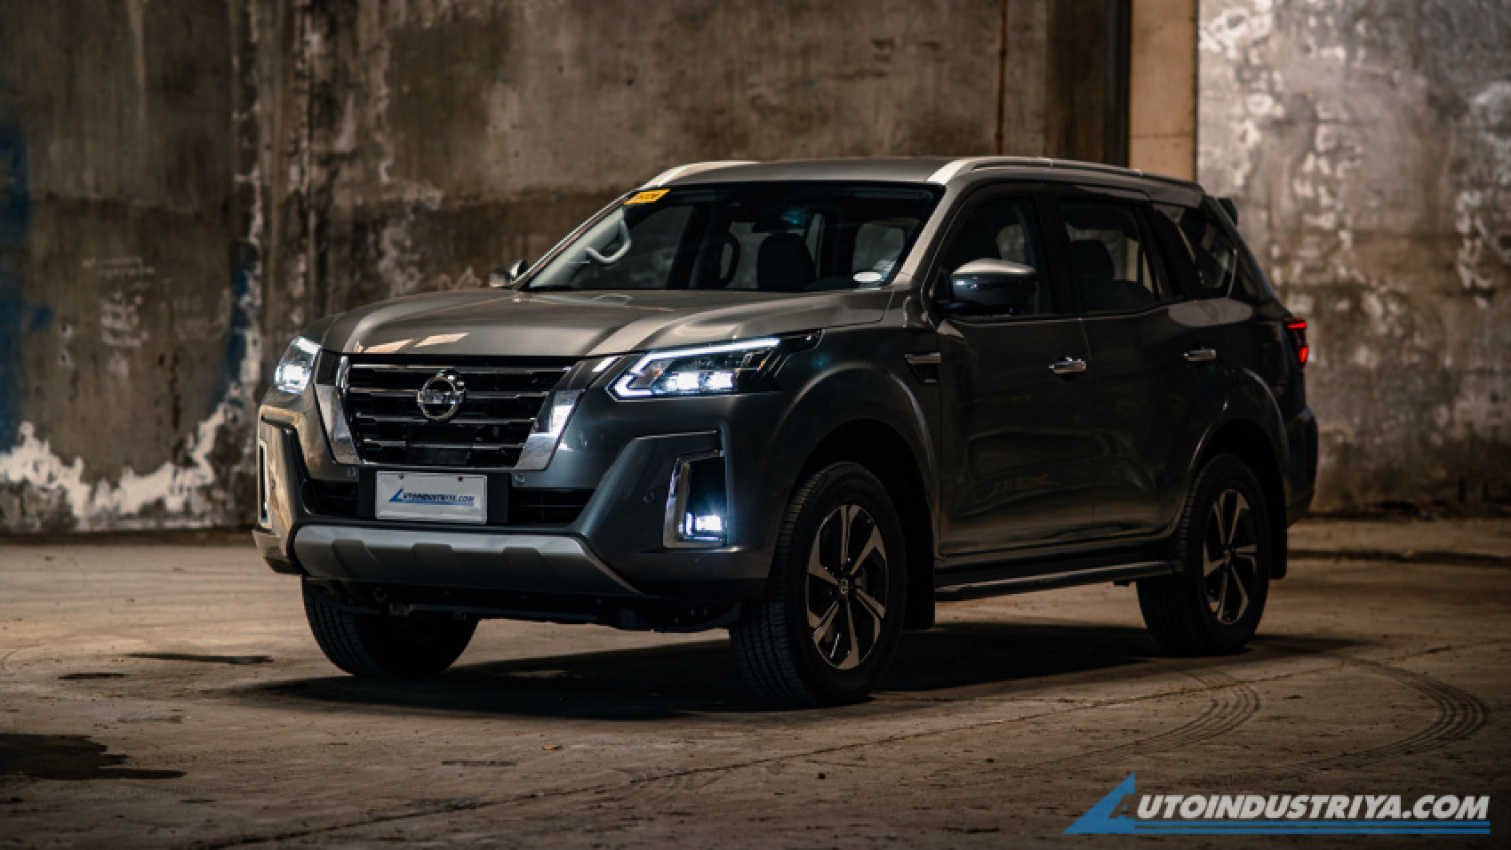 autos, car reviews, cars, nissan, reviews, android, nissan intelligent mobility, nissan philippines inc, nissan terra, nissan terra vl 4x2, vl 4x2, android, 2022 nissan terra vl 4x2 7at